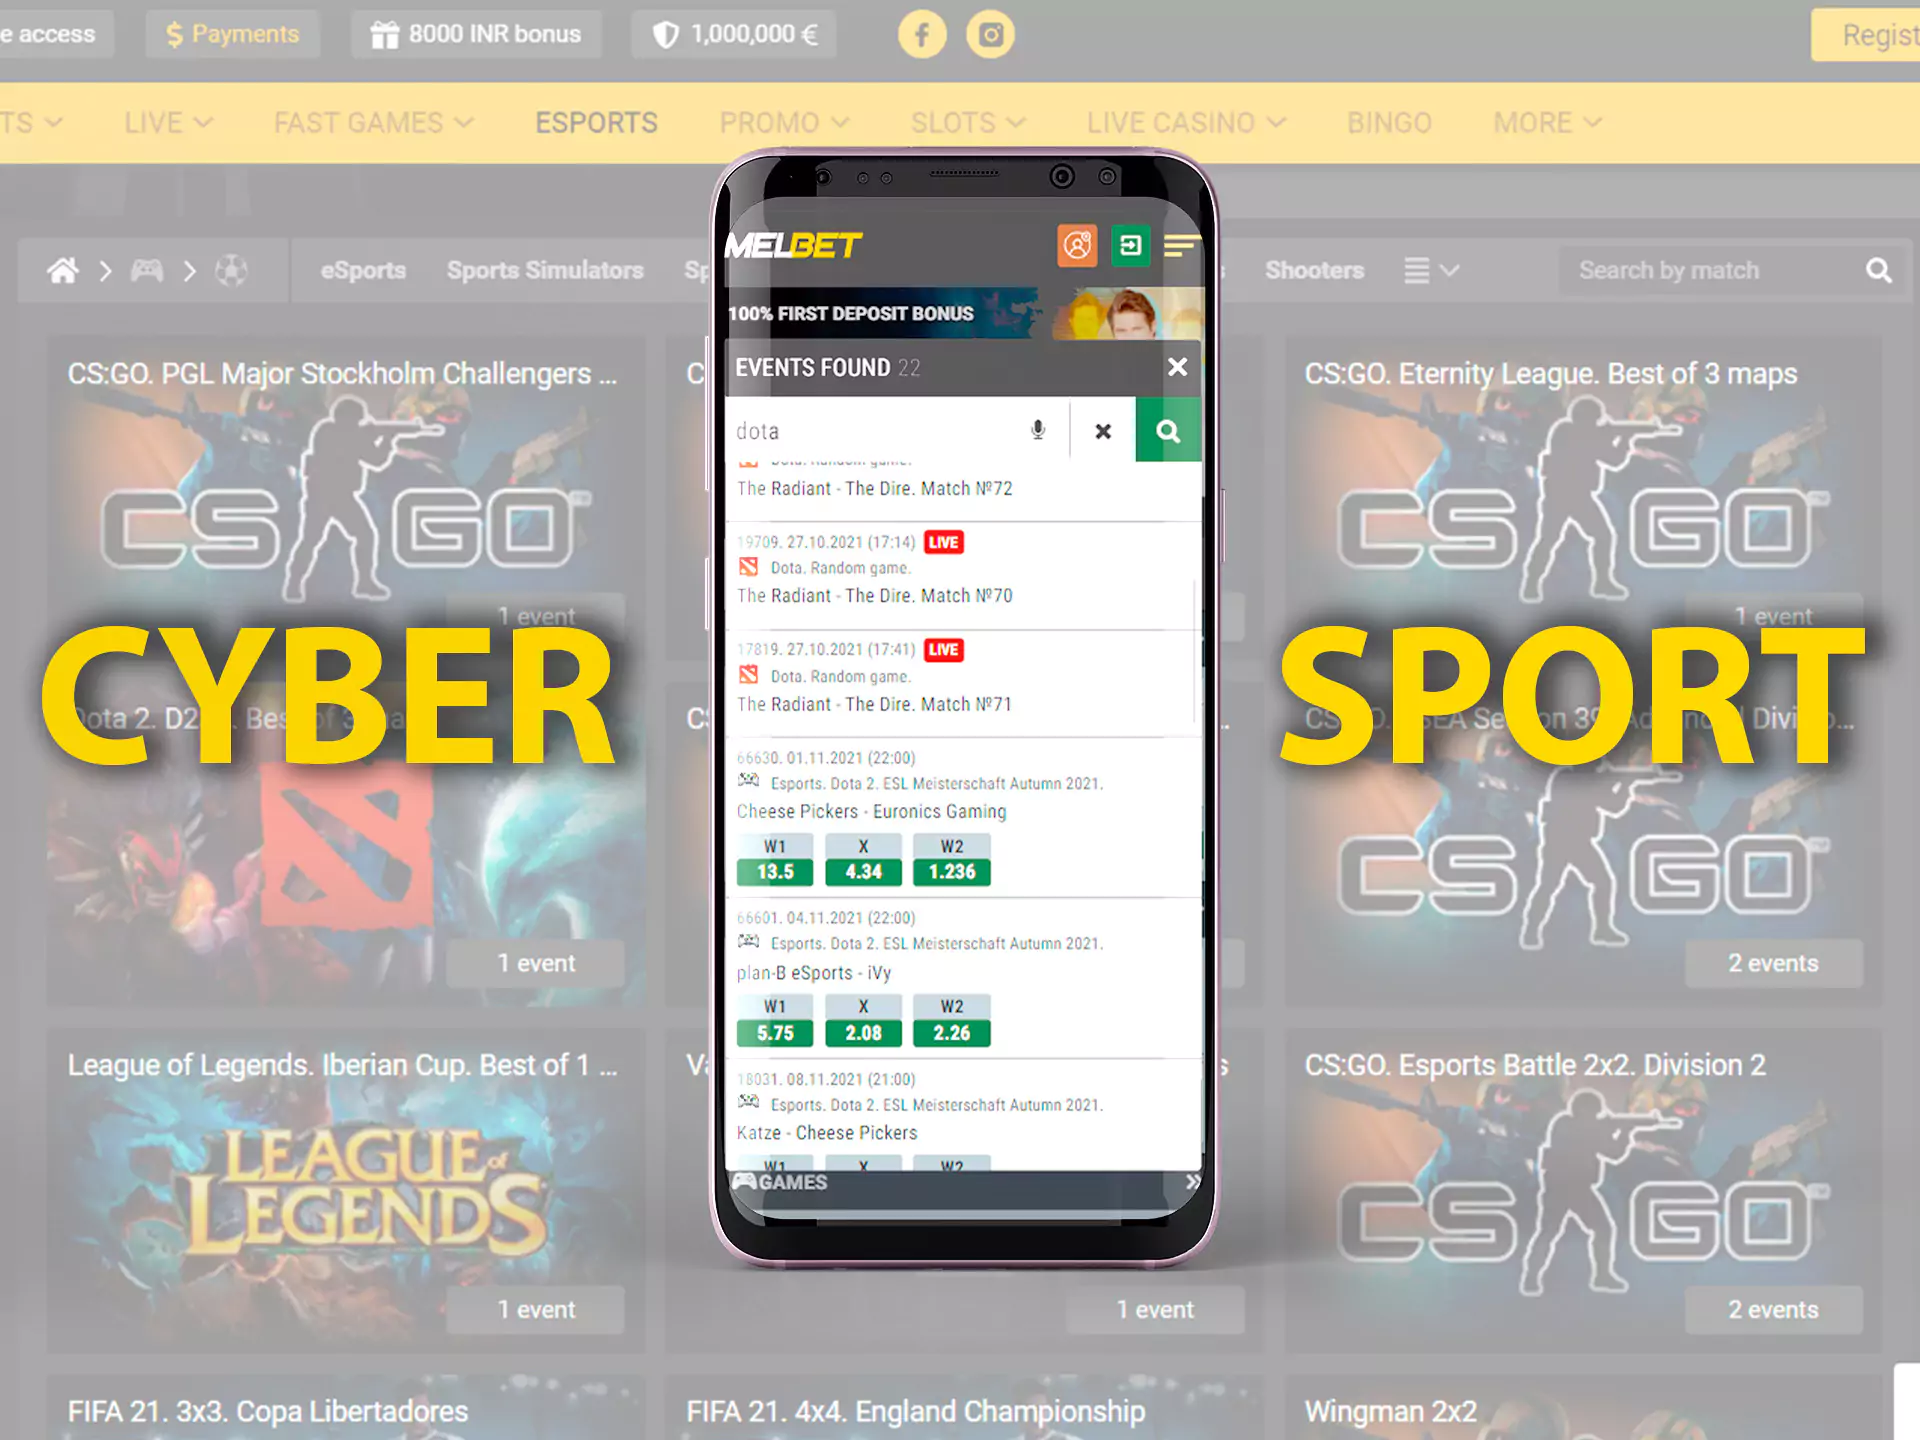 You can watch broadcasts and plca bets on cybersports right in the Melbet app.